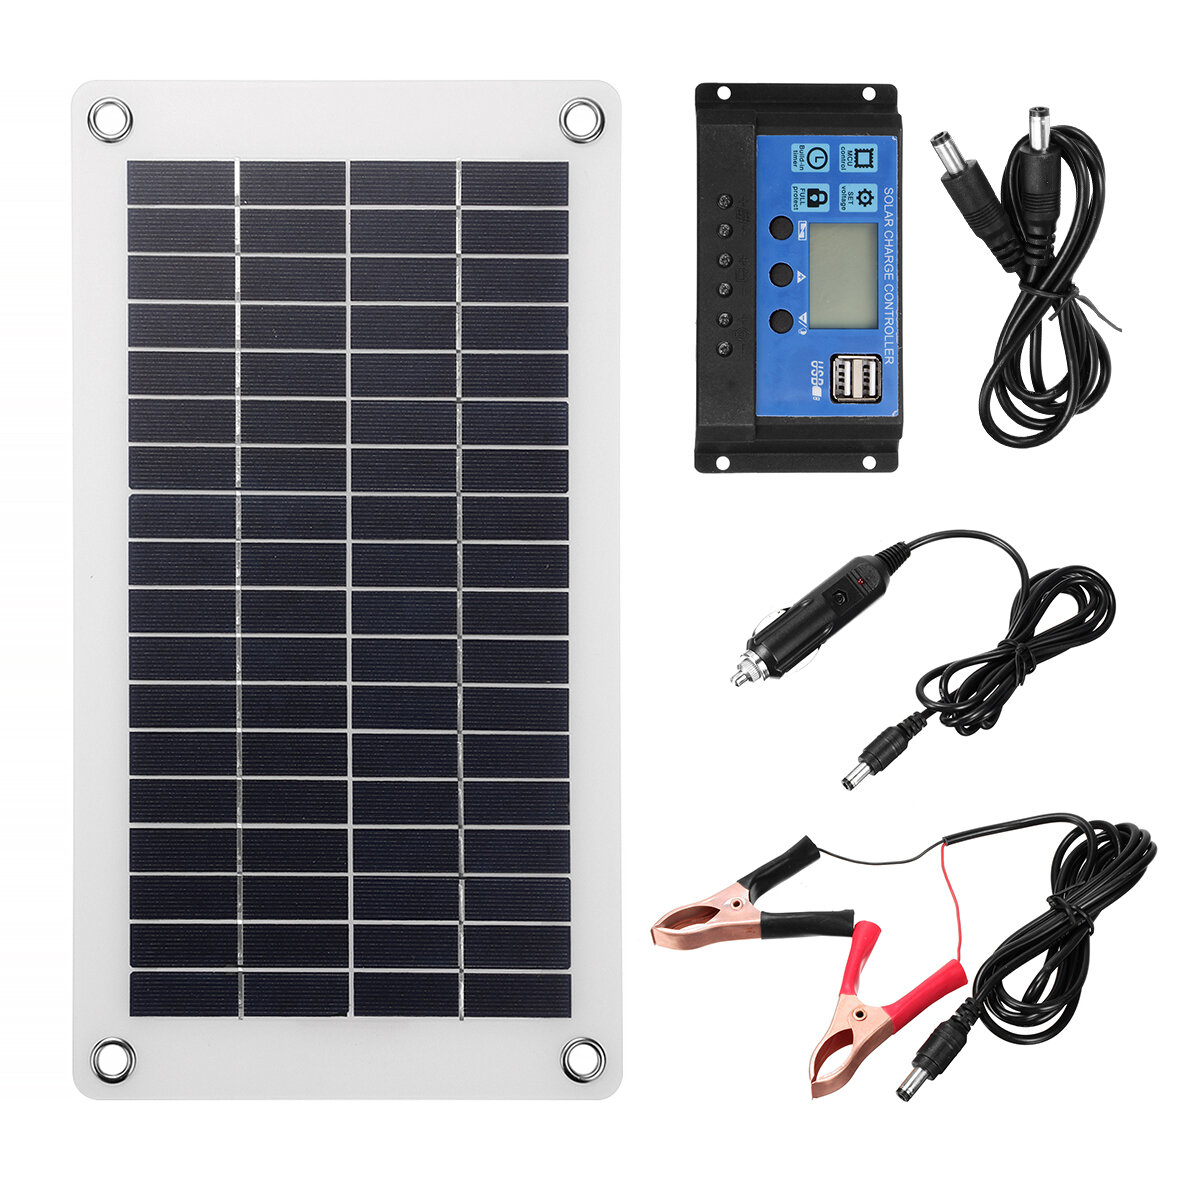 

12W 18V/5V Semi-flexible Solar Panel Charger DC Output Battery Mobile Phone Charger Dual USB